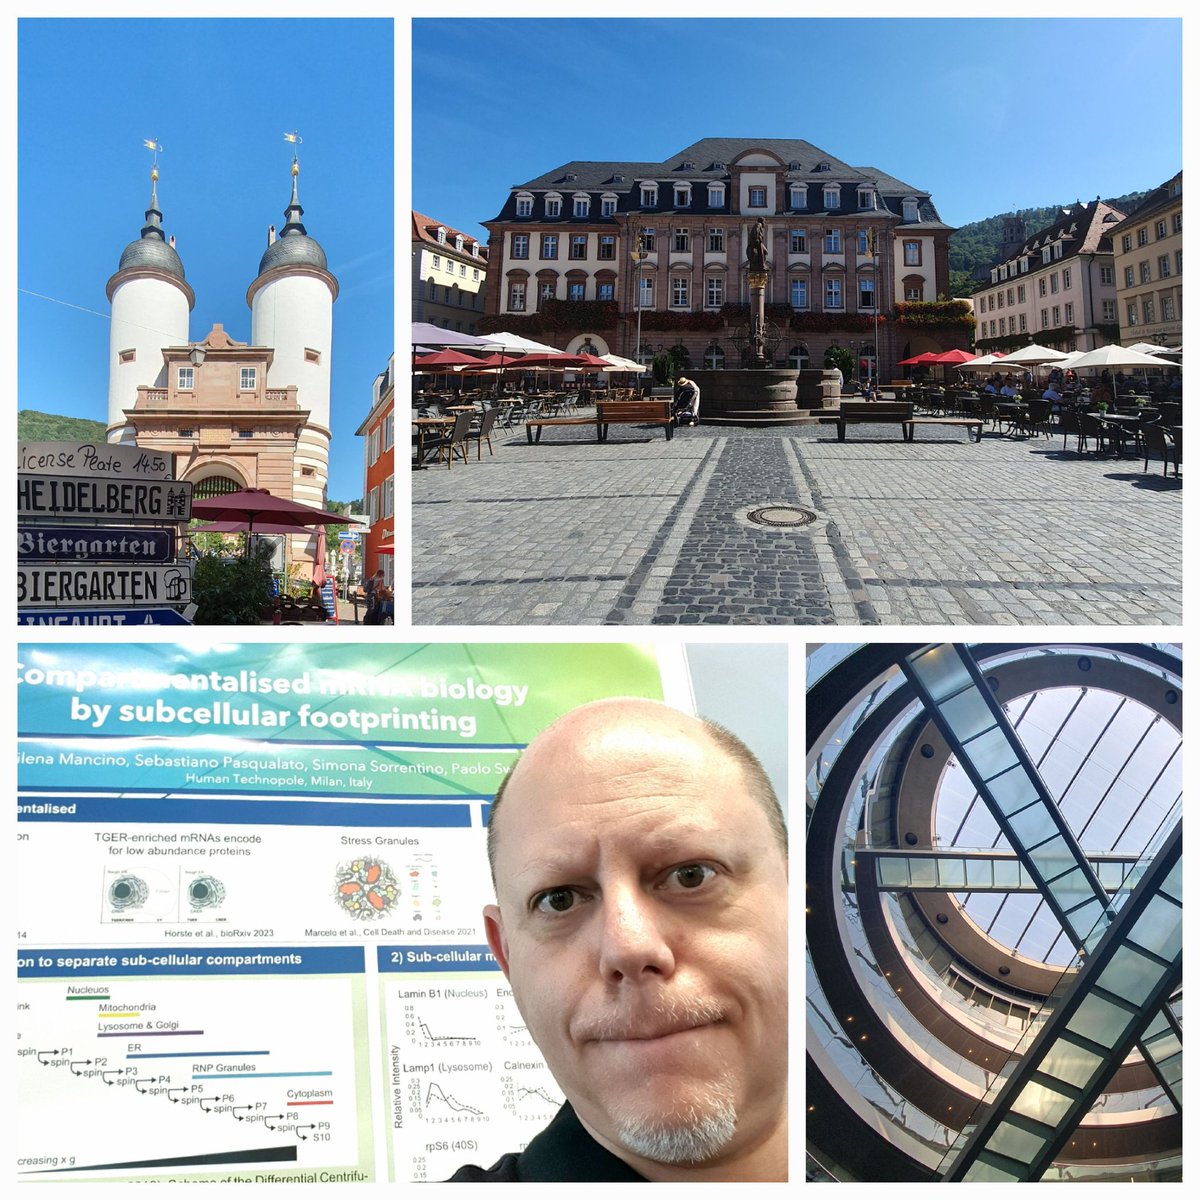 Proud to represent @CalvielloLab @humantechnopole at the protein synthesis and translation control conference in Heidelberg. Great talks, many new and old friends! #EMBLprotein